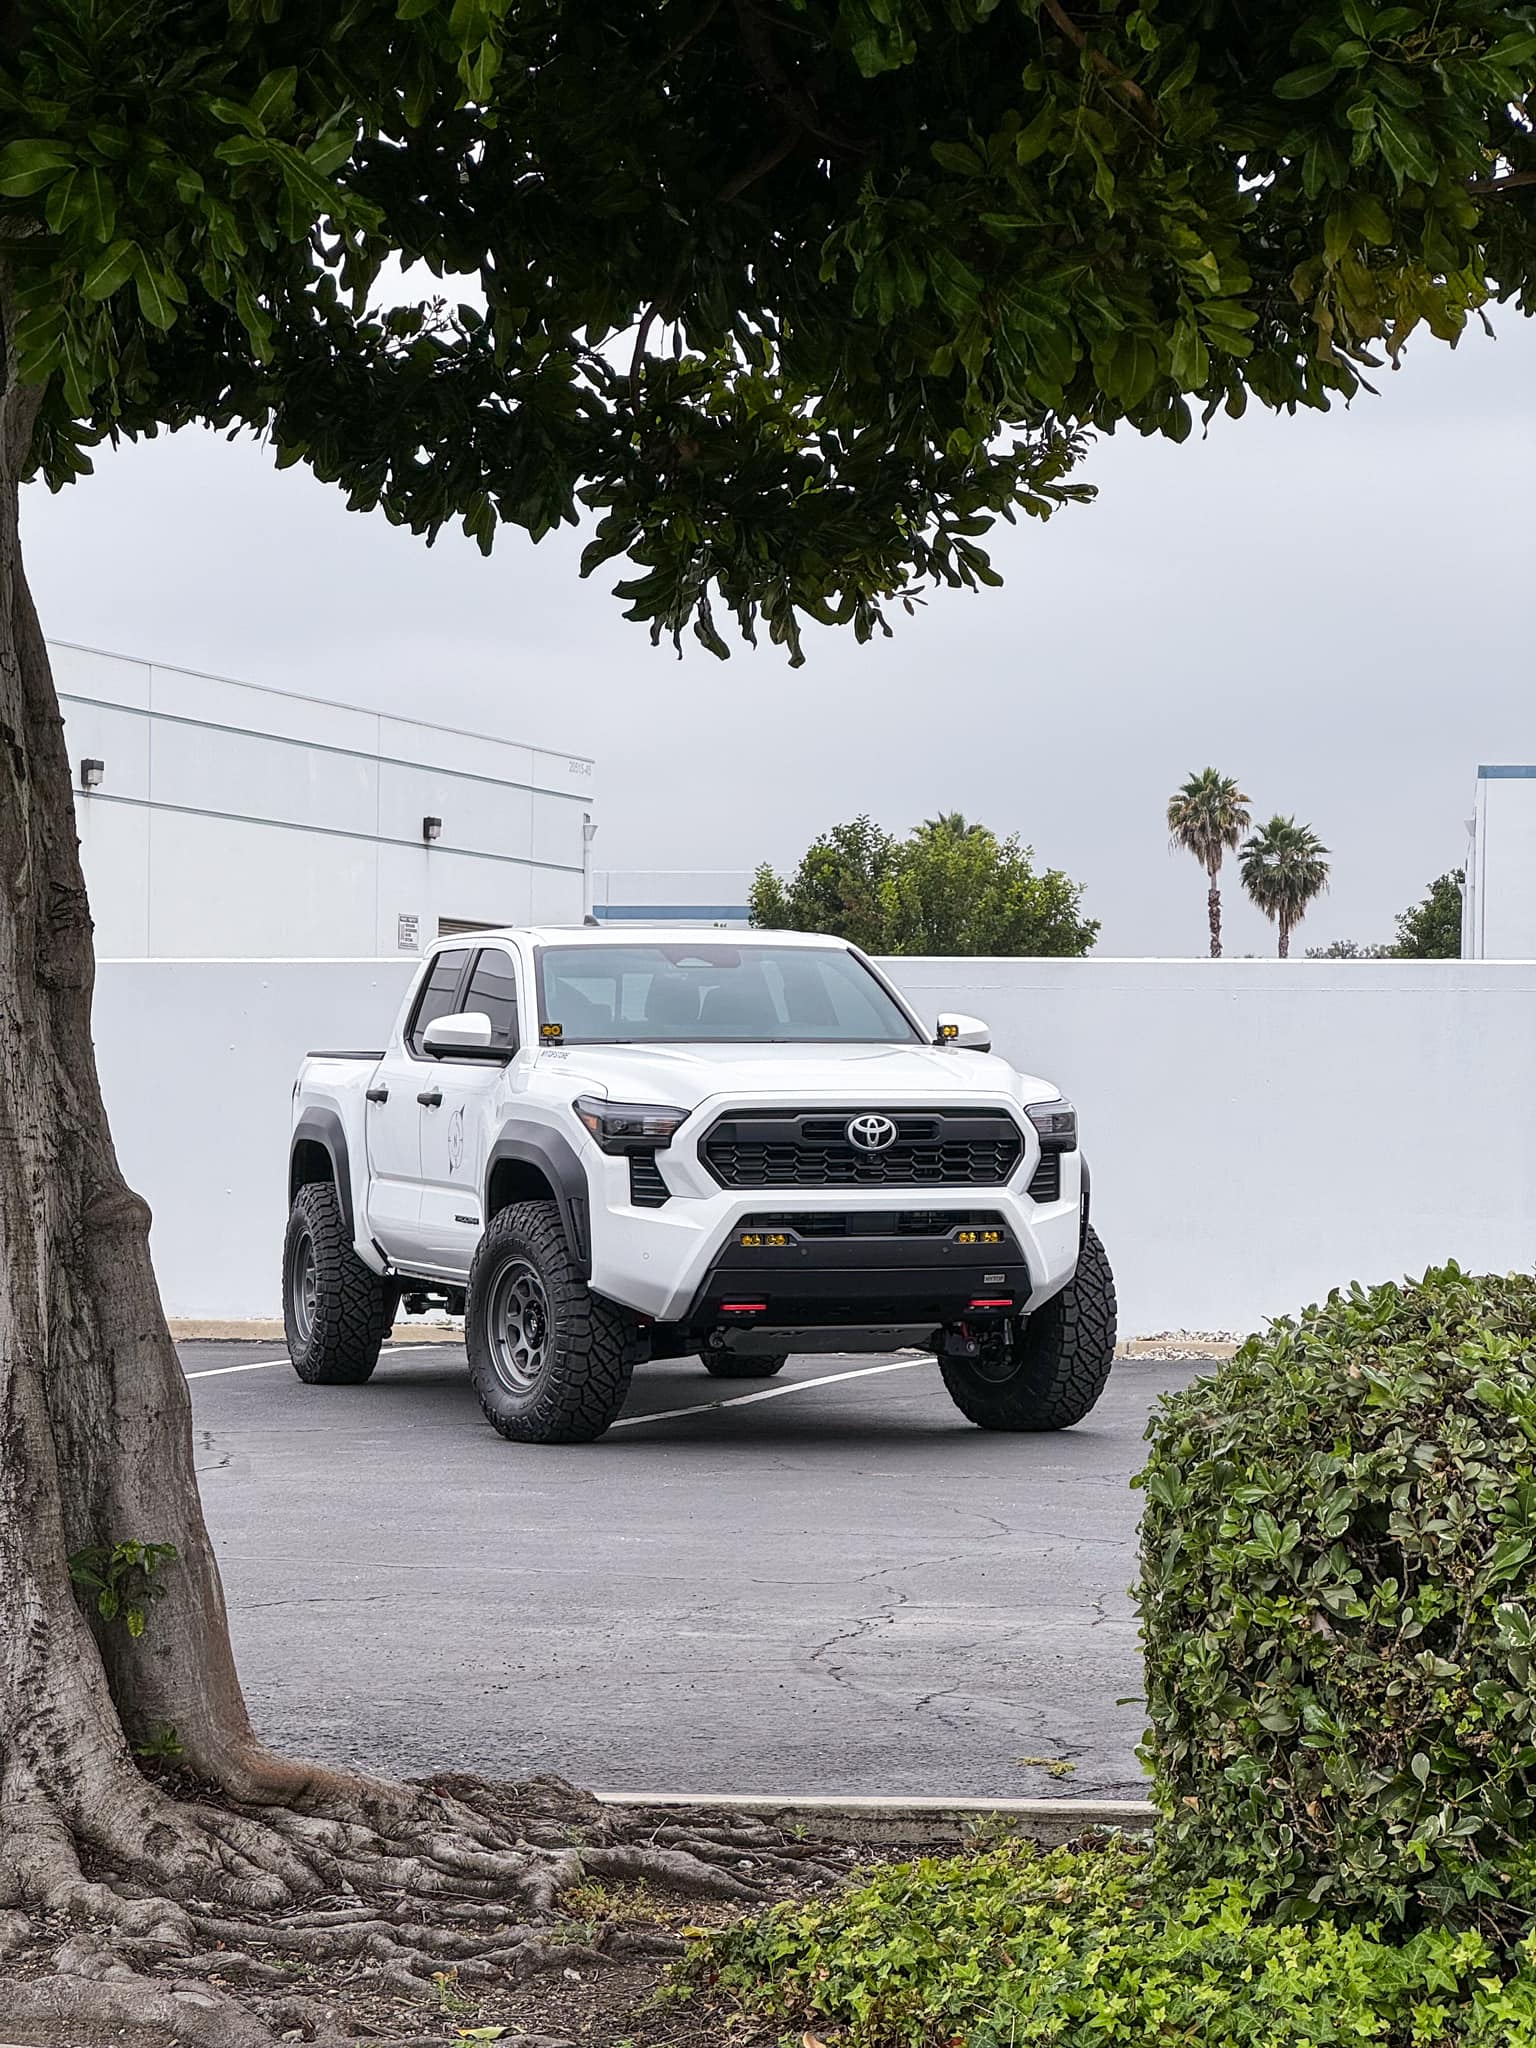 2024 Tacoma NYTOP's 2024 Tacoma build on Fittipaldi Offroad FT Series 17x8.5 0 offset wheels + Nitto Ridge Grappler 285/75/17 34" tires 425926396_7723482701098729_6031207336078179032_n